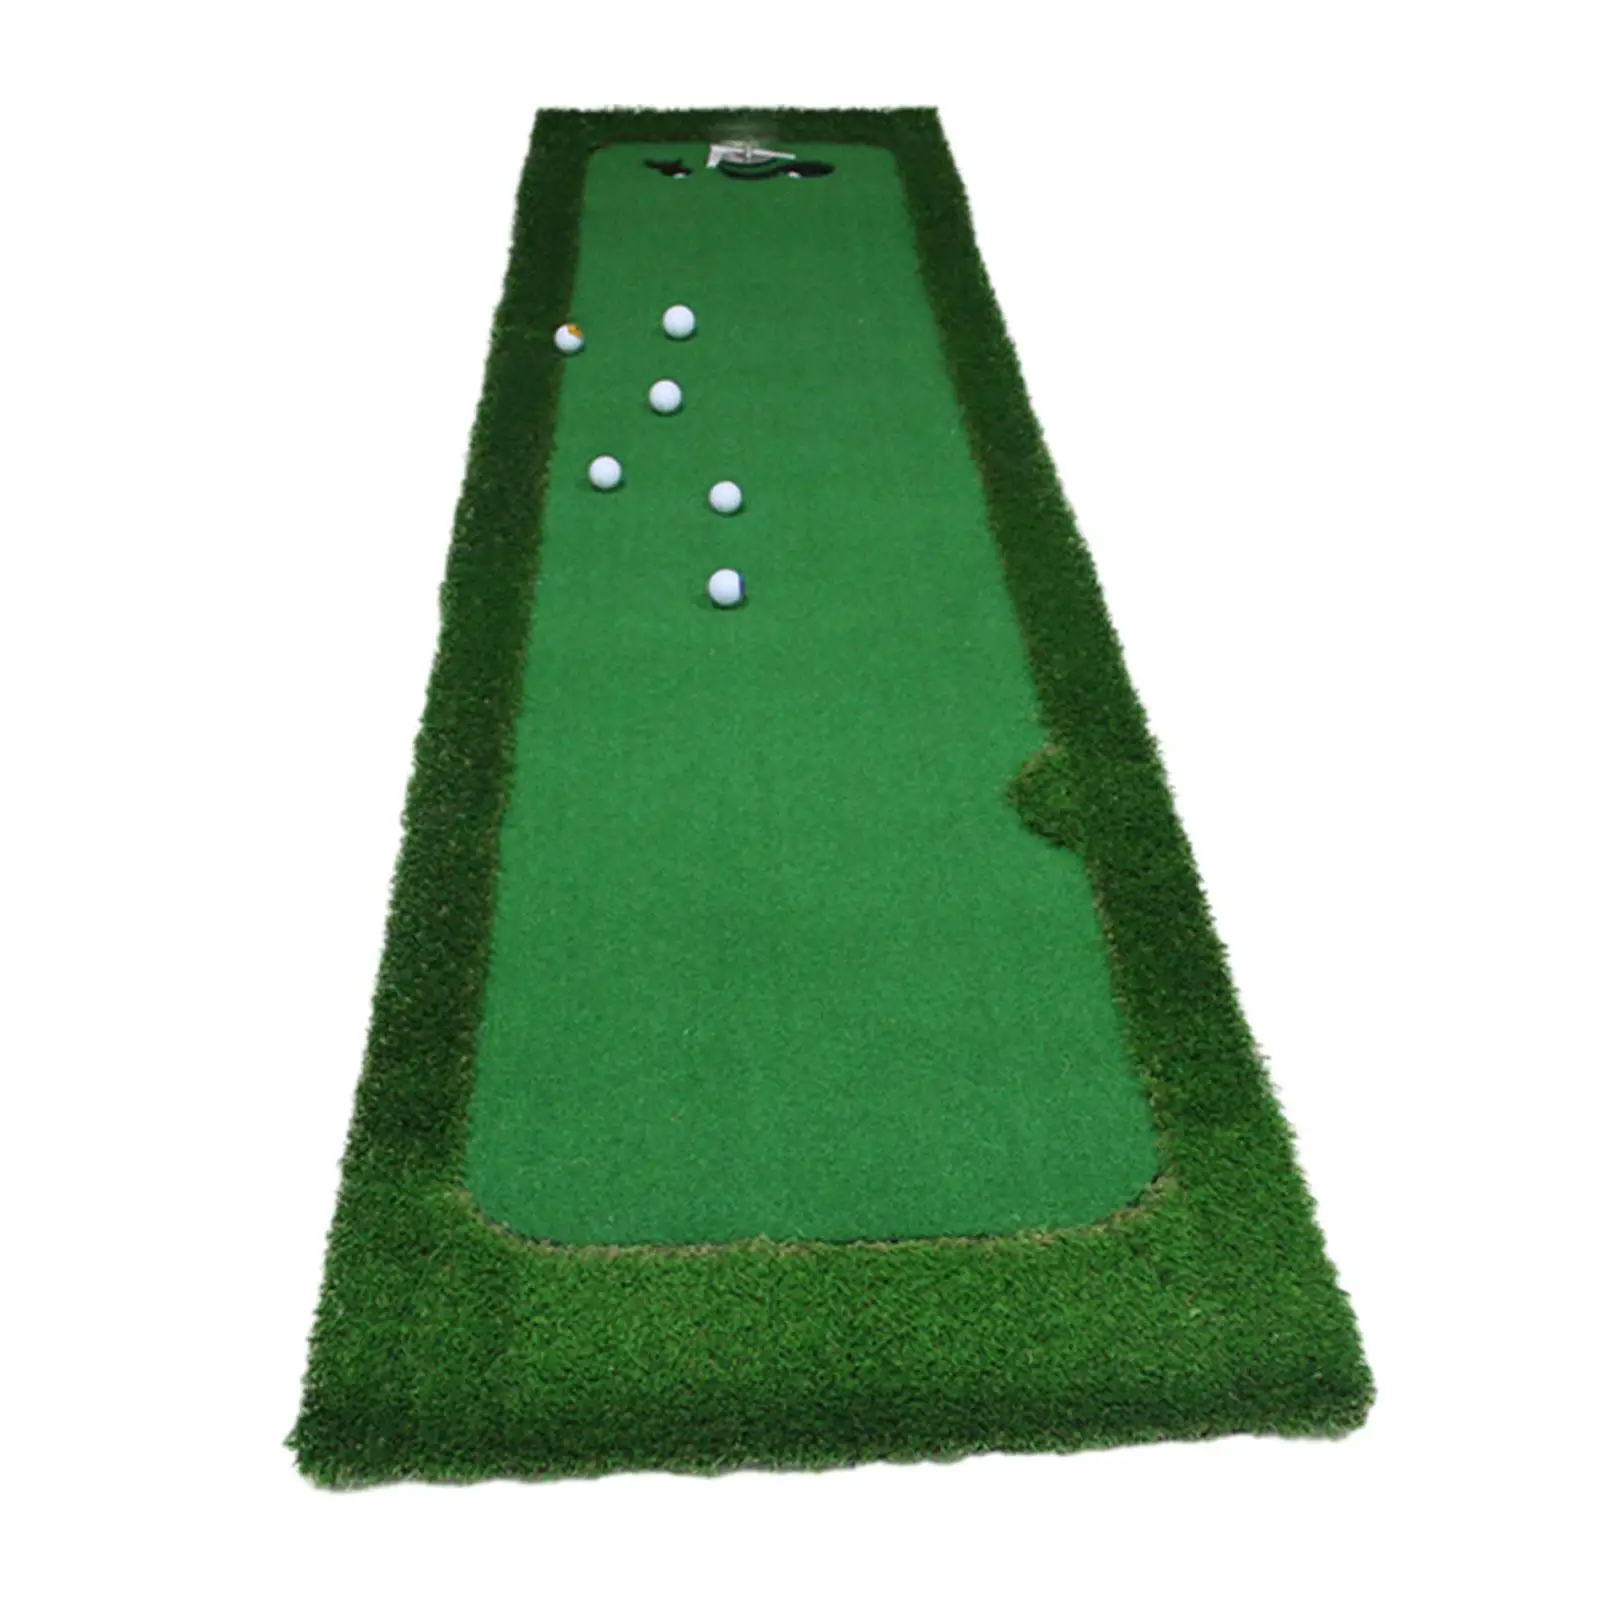 Golf Putting Mat Portable Nonslip Green with 6Pcs Balls for Games Party Home